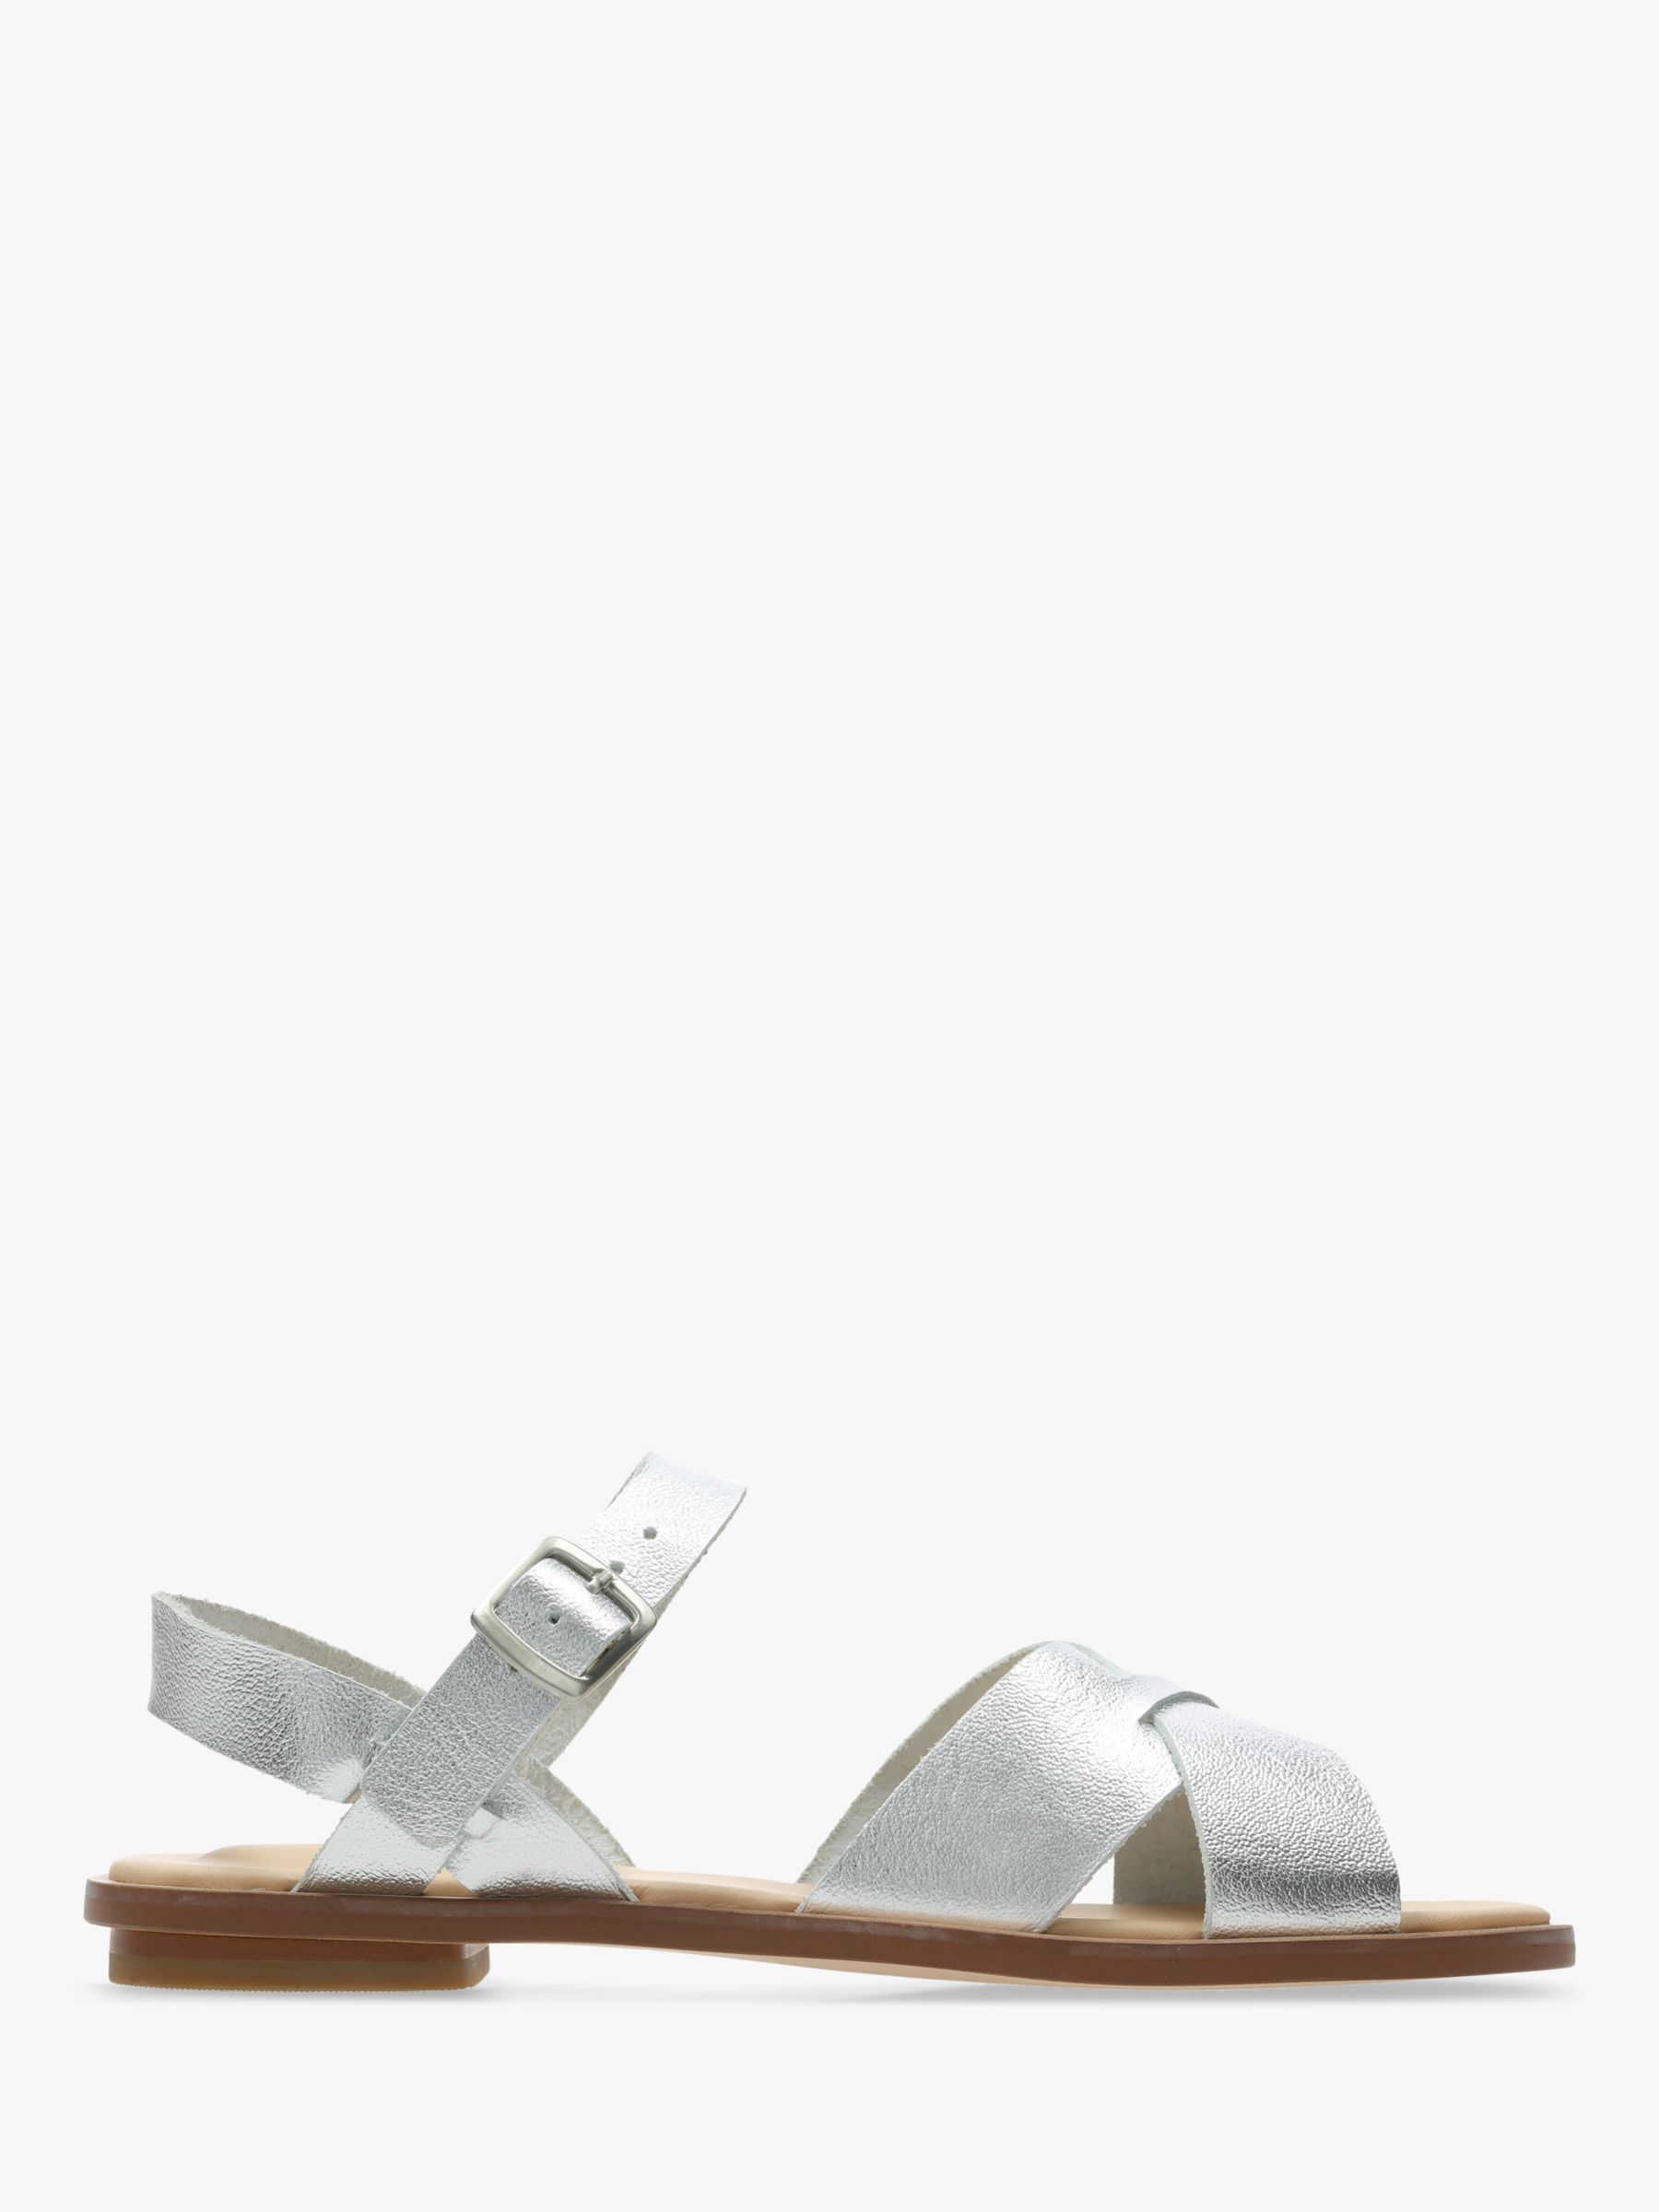 Clarks Willow Gild Cross Strap Sandals, Silver Leather